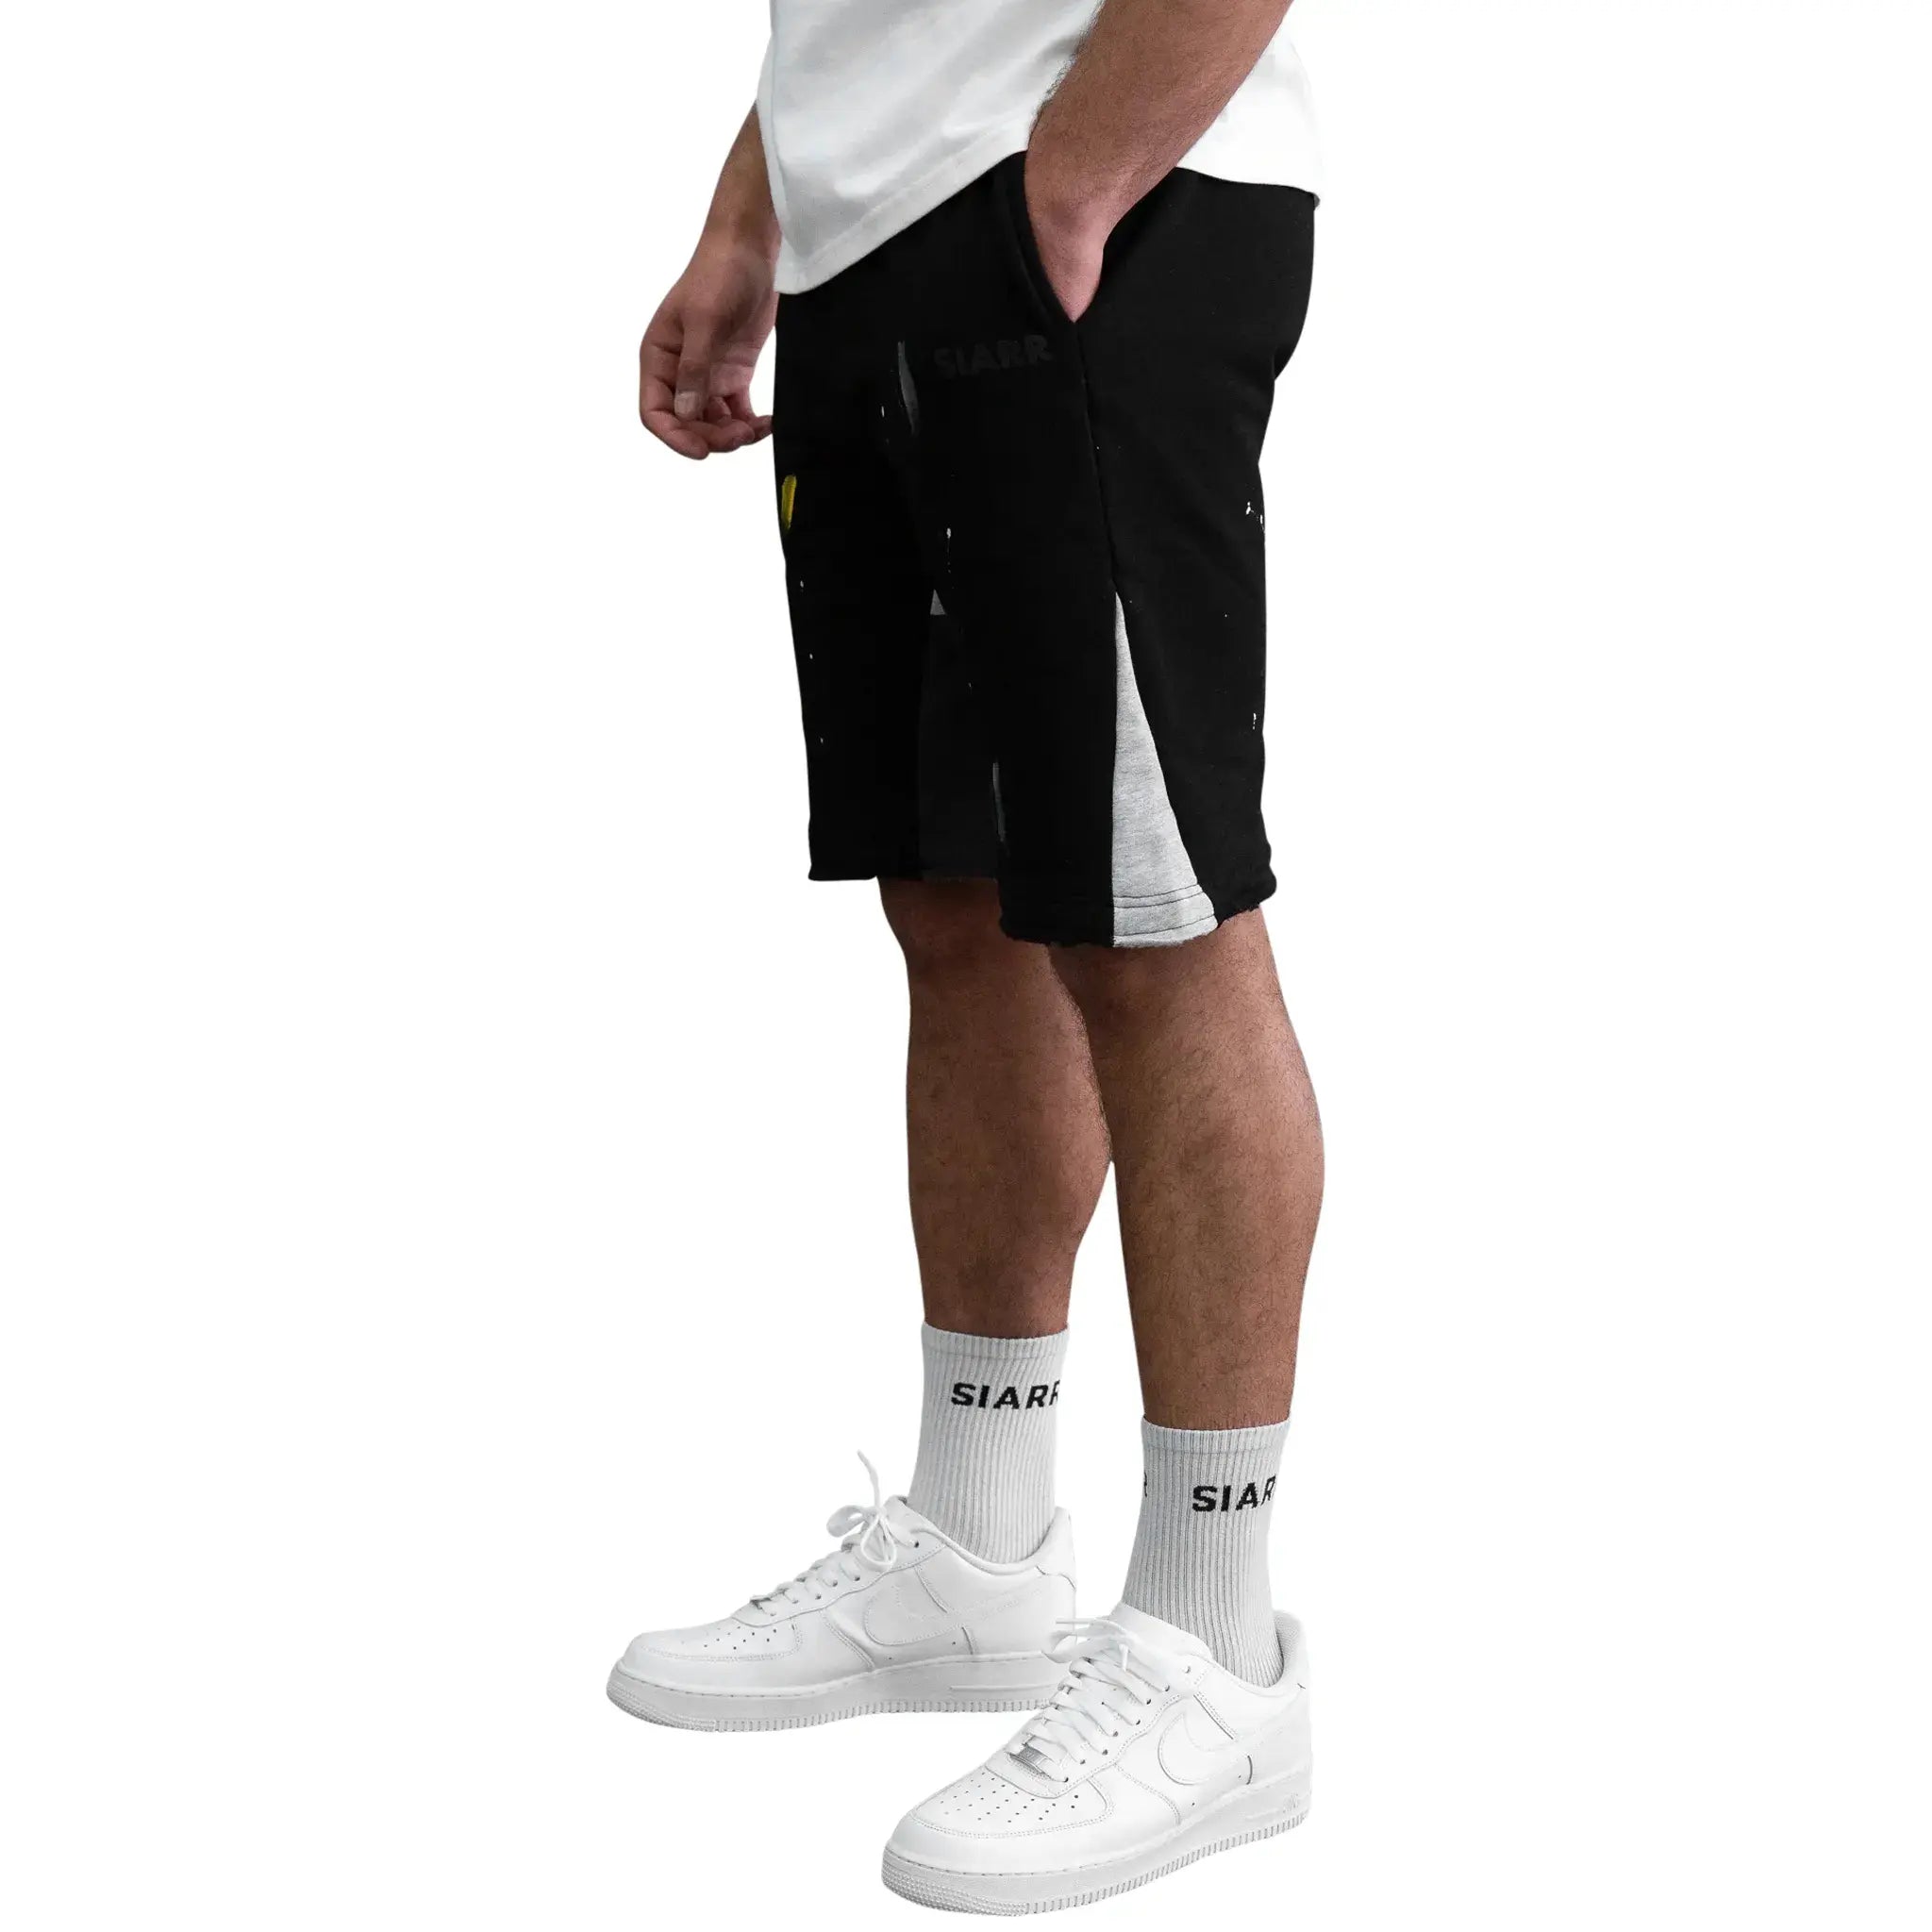 Model side view of SIARR Paint Shorts Black